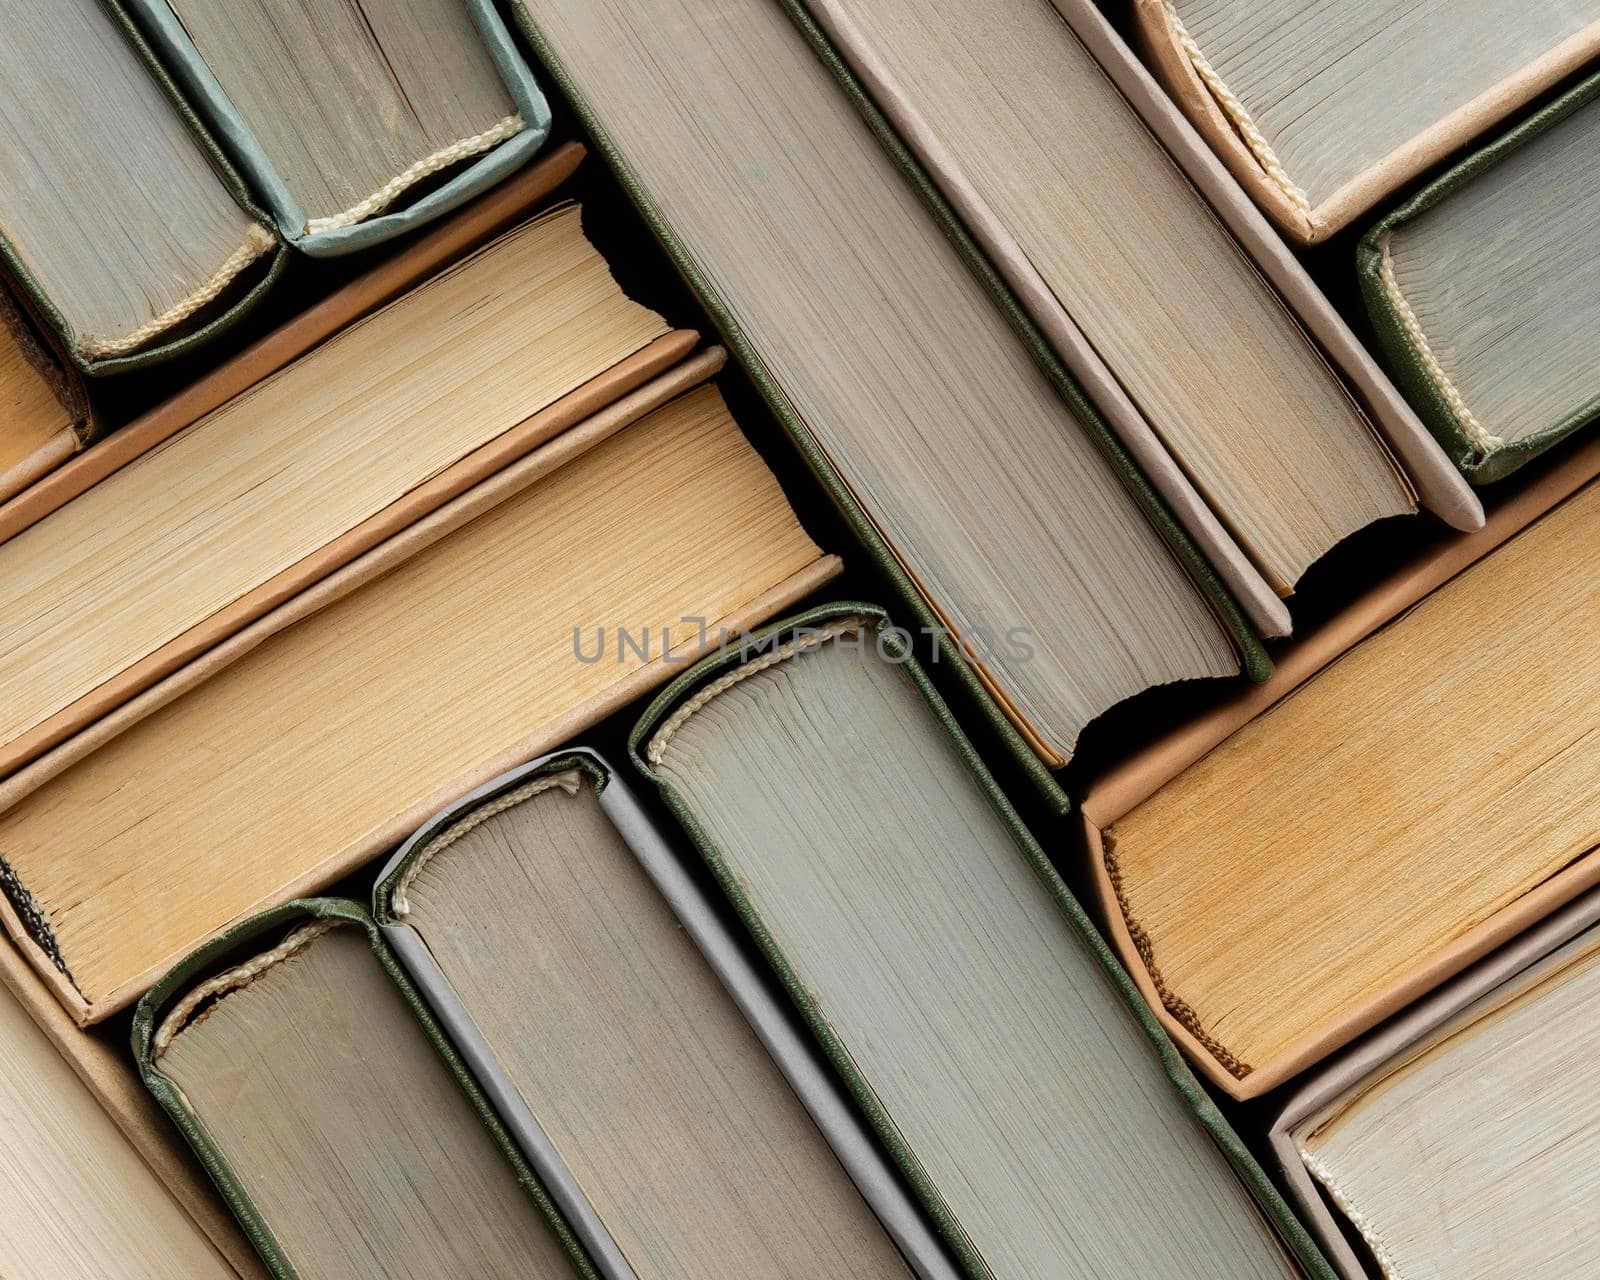 creative composition with different books_2 by Zahard